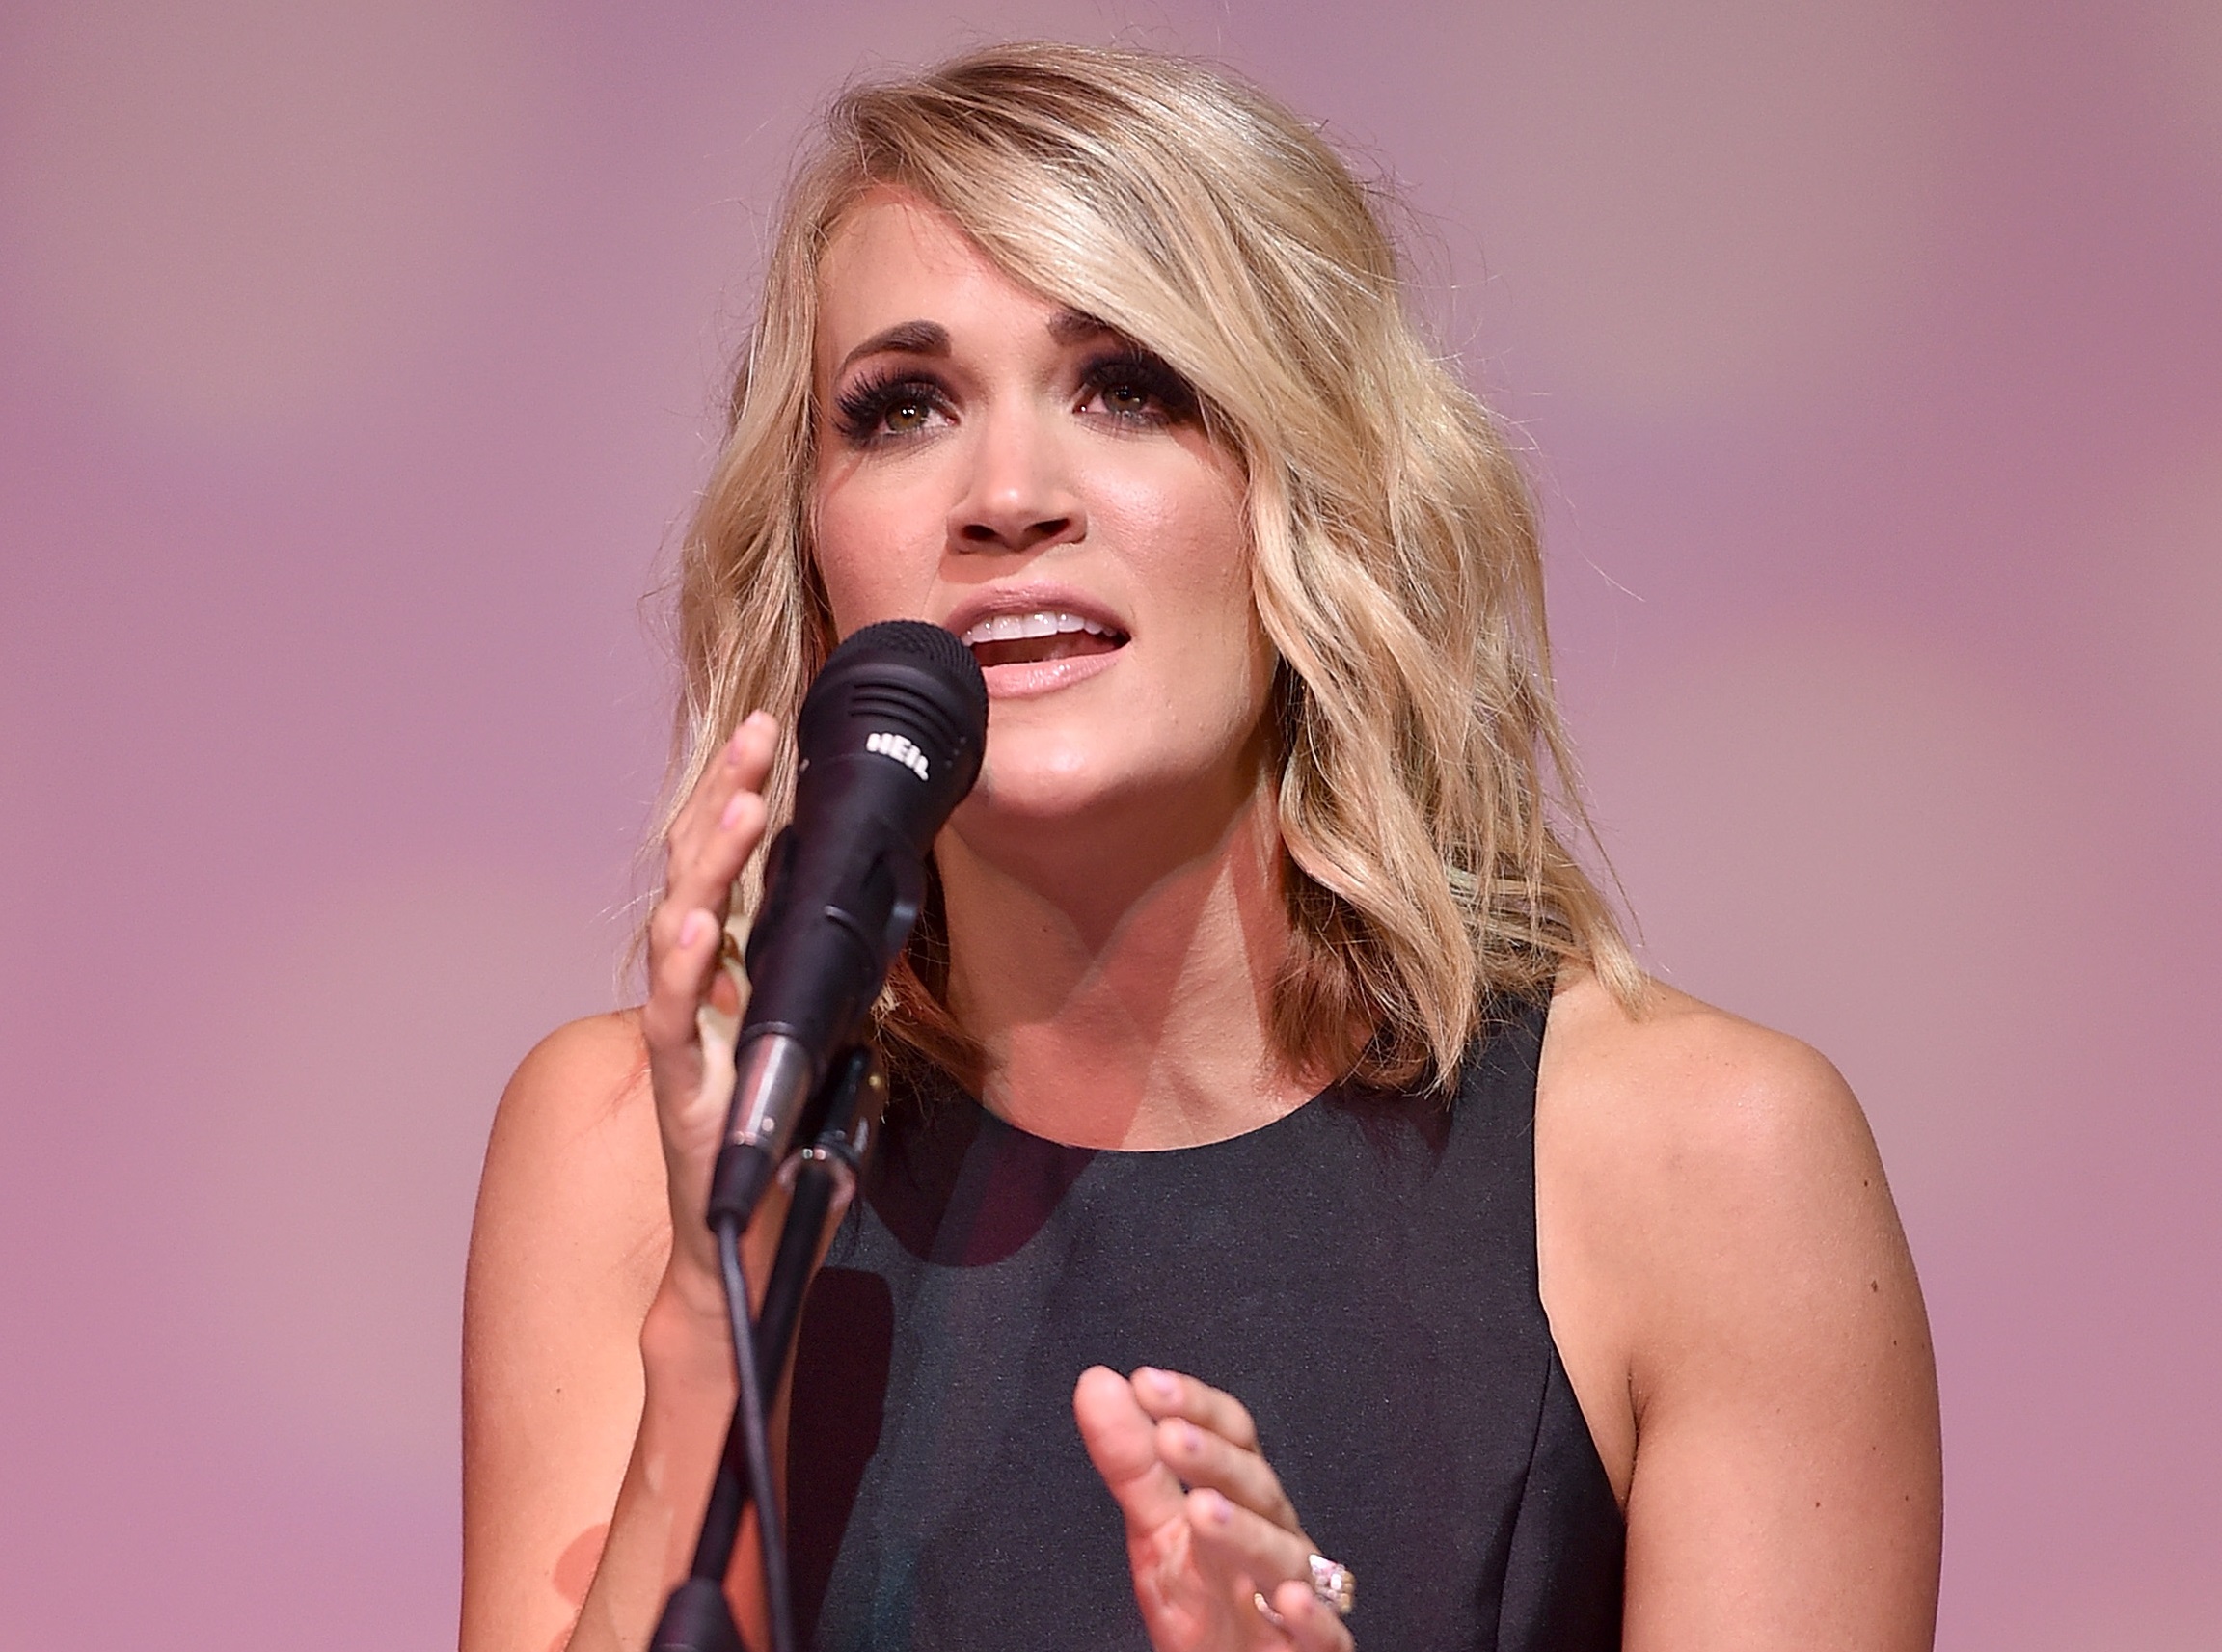 Carrie Underwood Encourages Hometown Girls in CALIA Video Sounds Like  Nashville